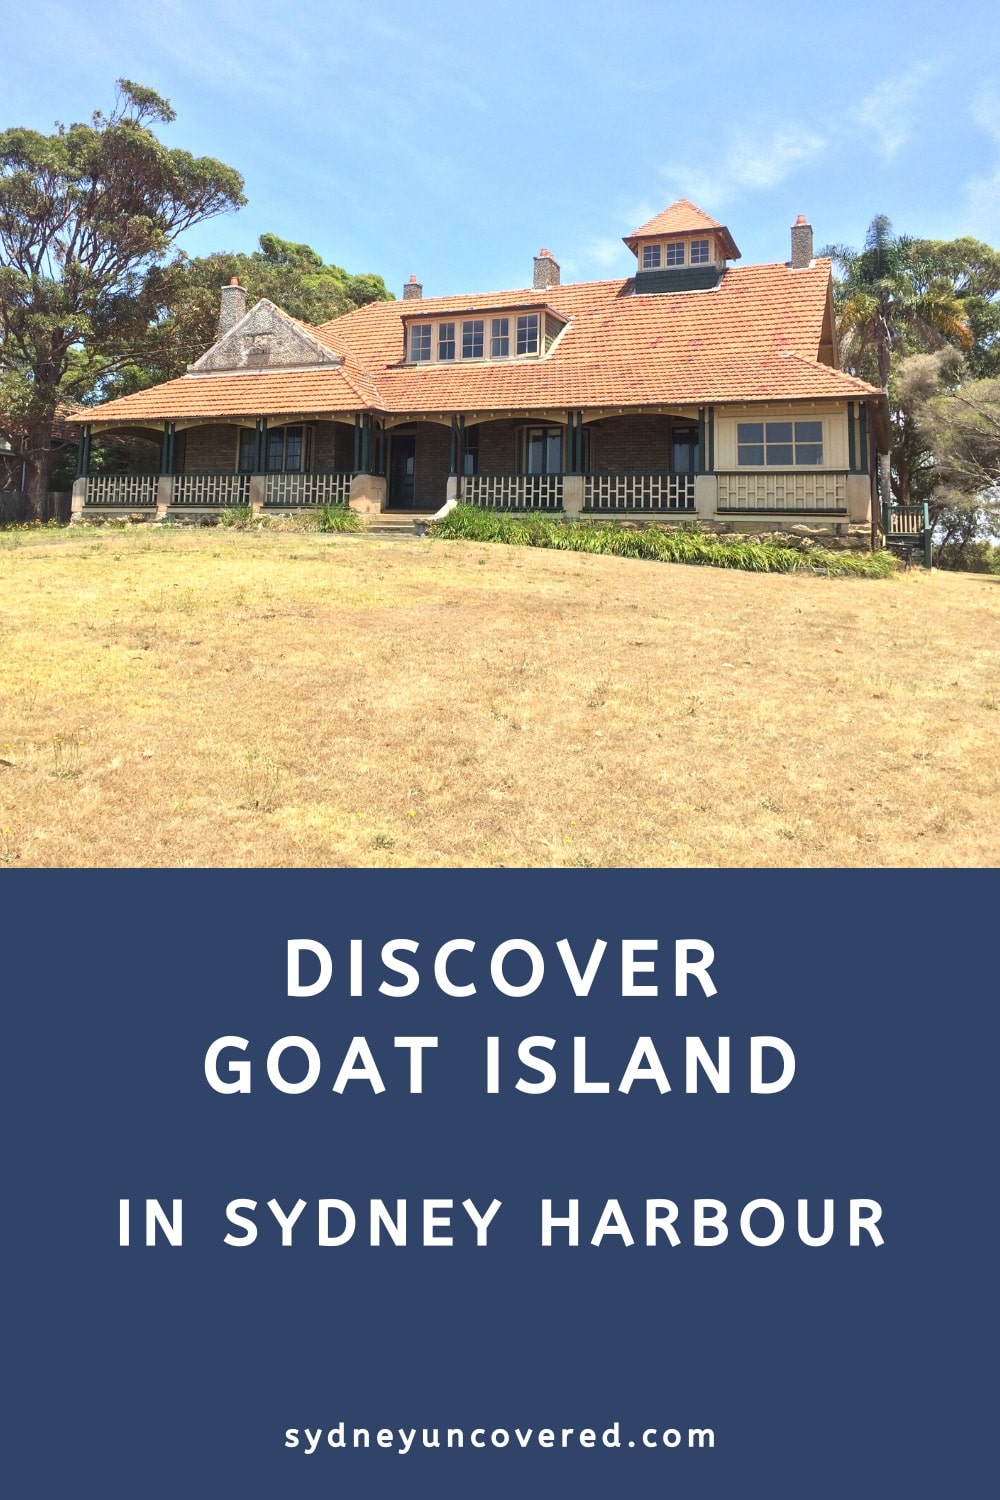 Discover Goat Island in Sydney Harbour